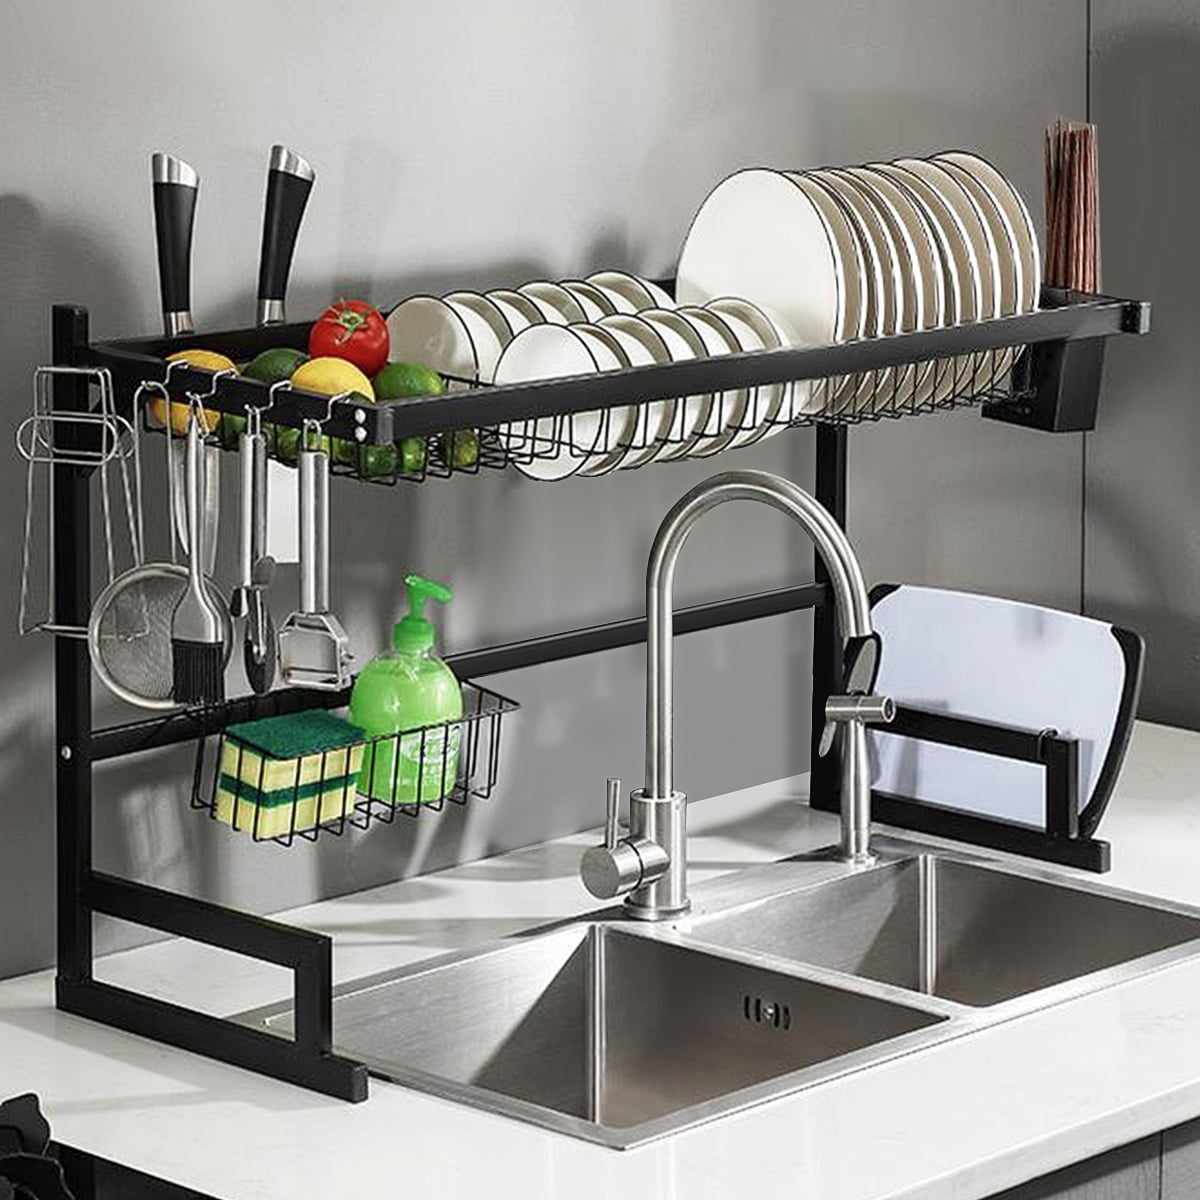 Stainless Steel 2 Tier Dish Drying Rack - Over Sink, Drainer Shelf Two Tier Stainless Steel Dish Rack